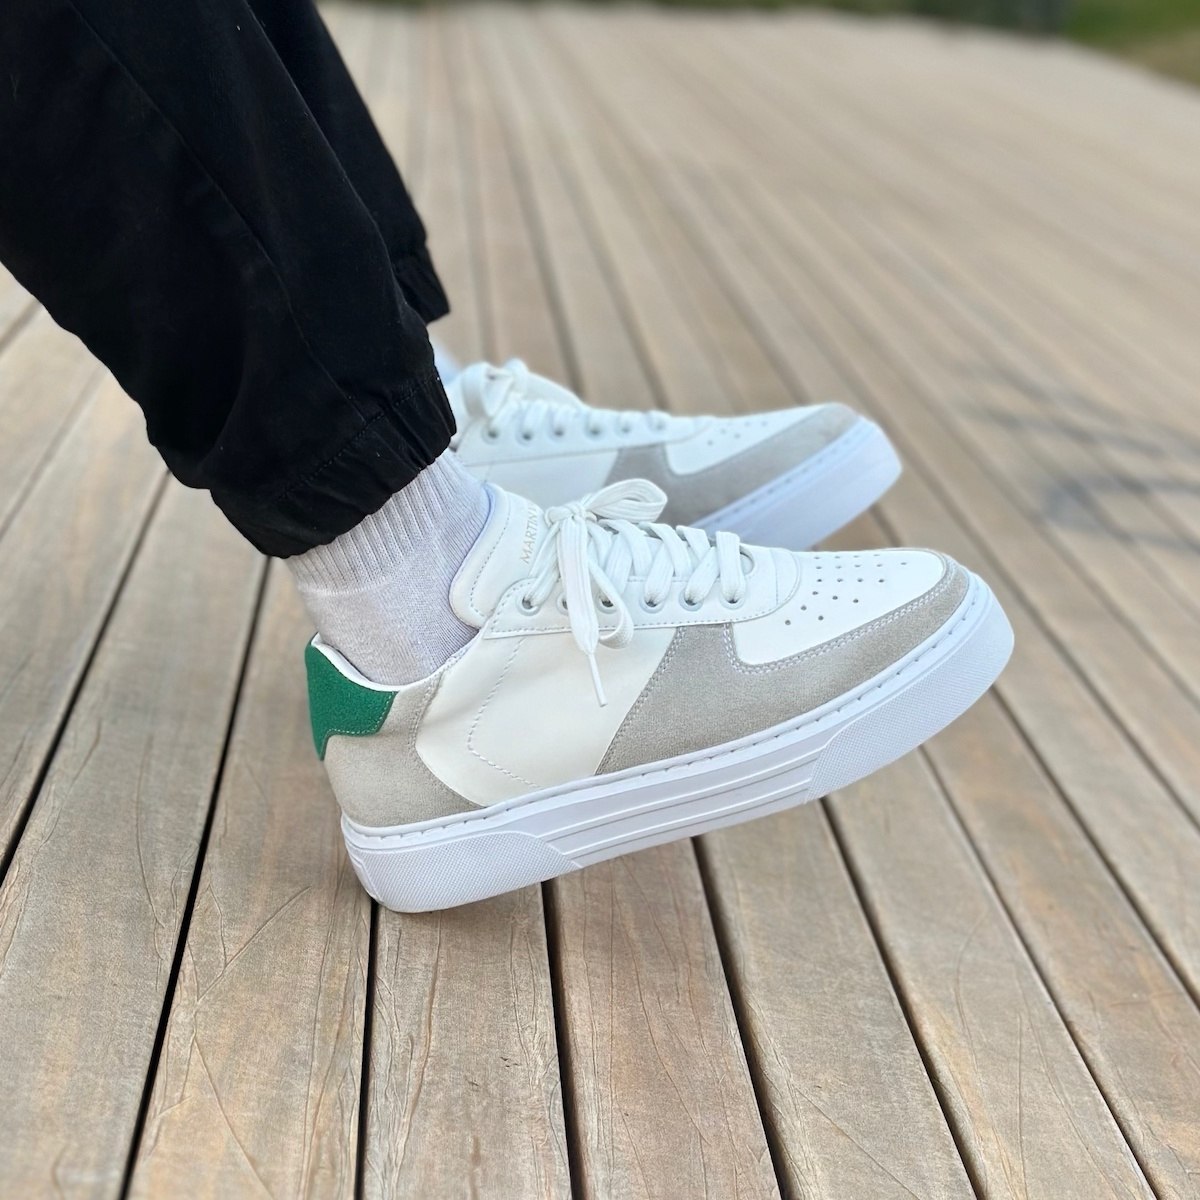 Moix Comfort Sports Trainers in White and Green | Martin Valen